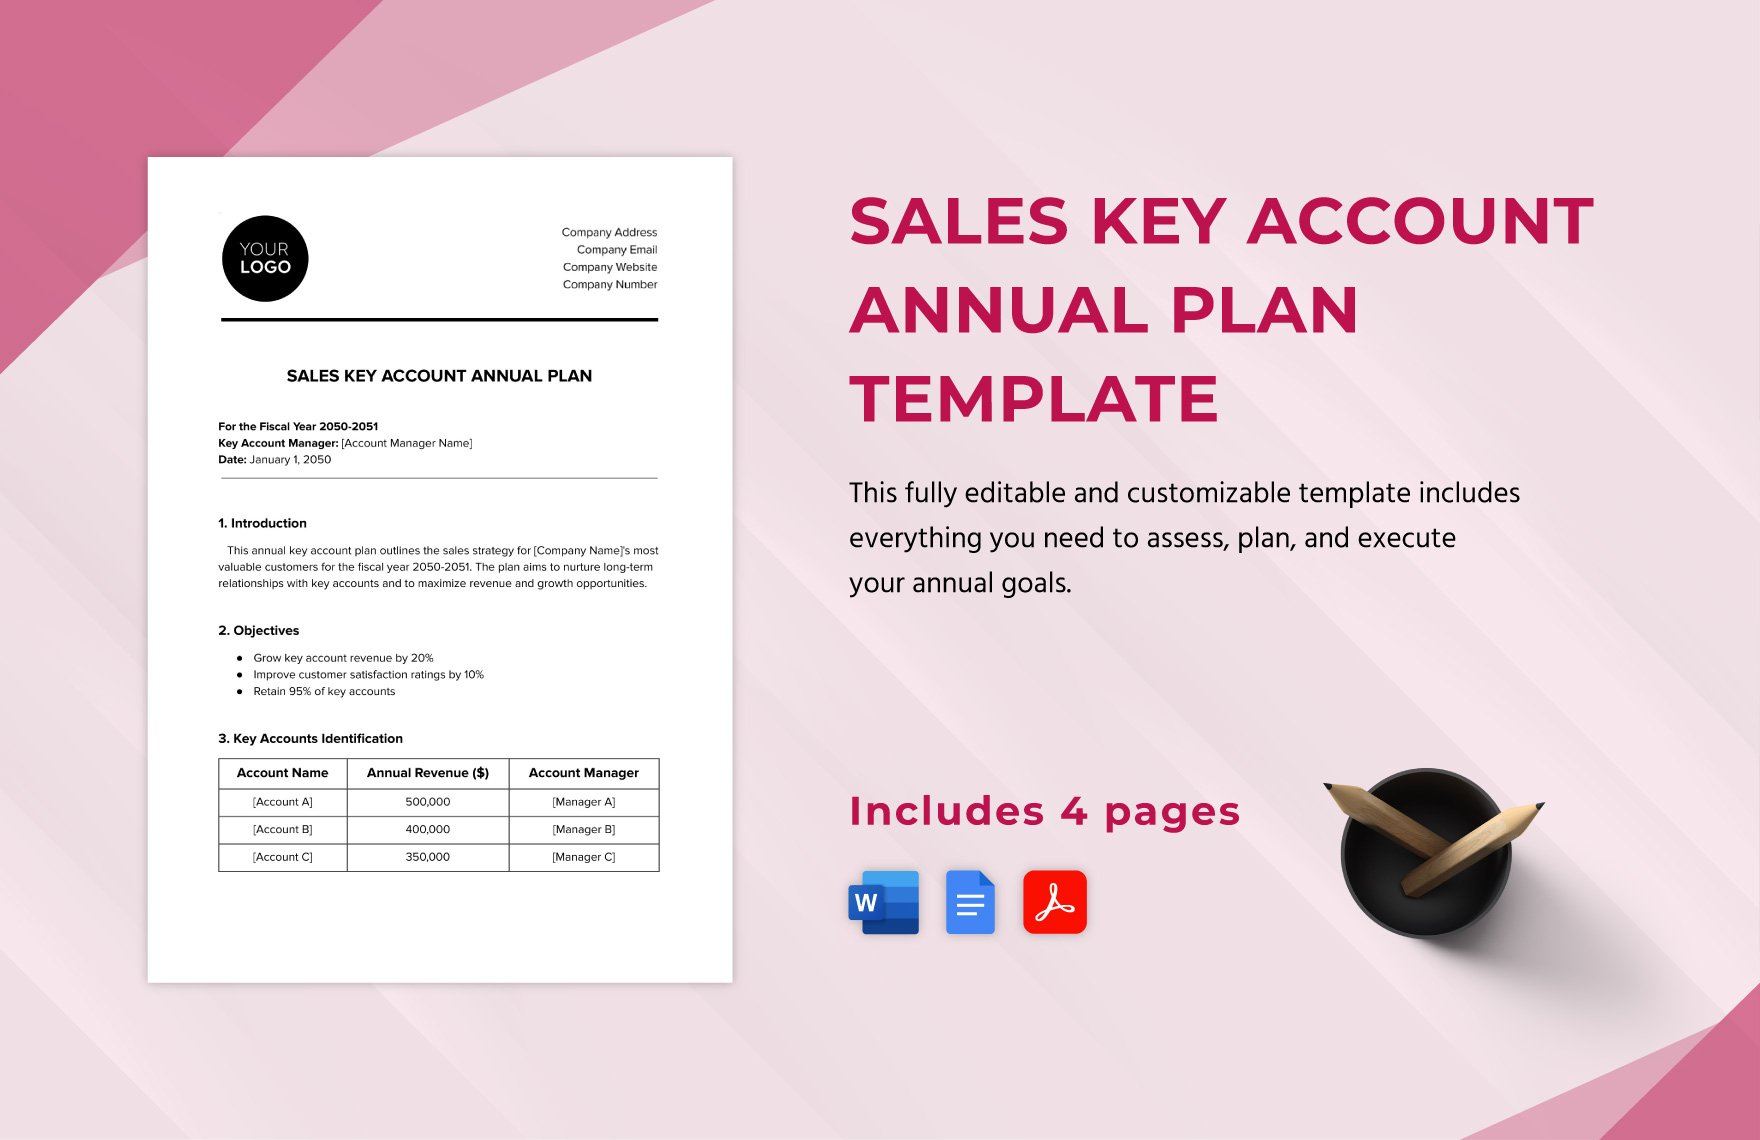 Sales Key Account Annual Plan Template in Word, Google Docs, PDF